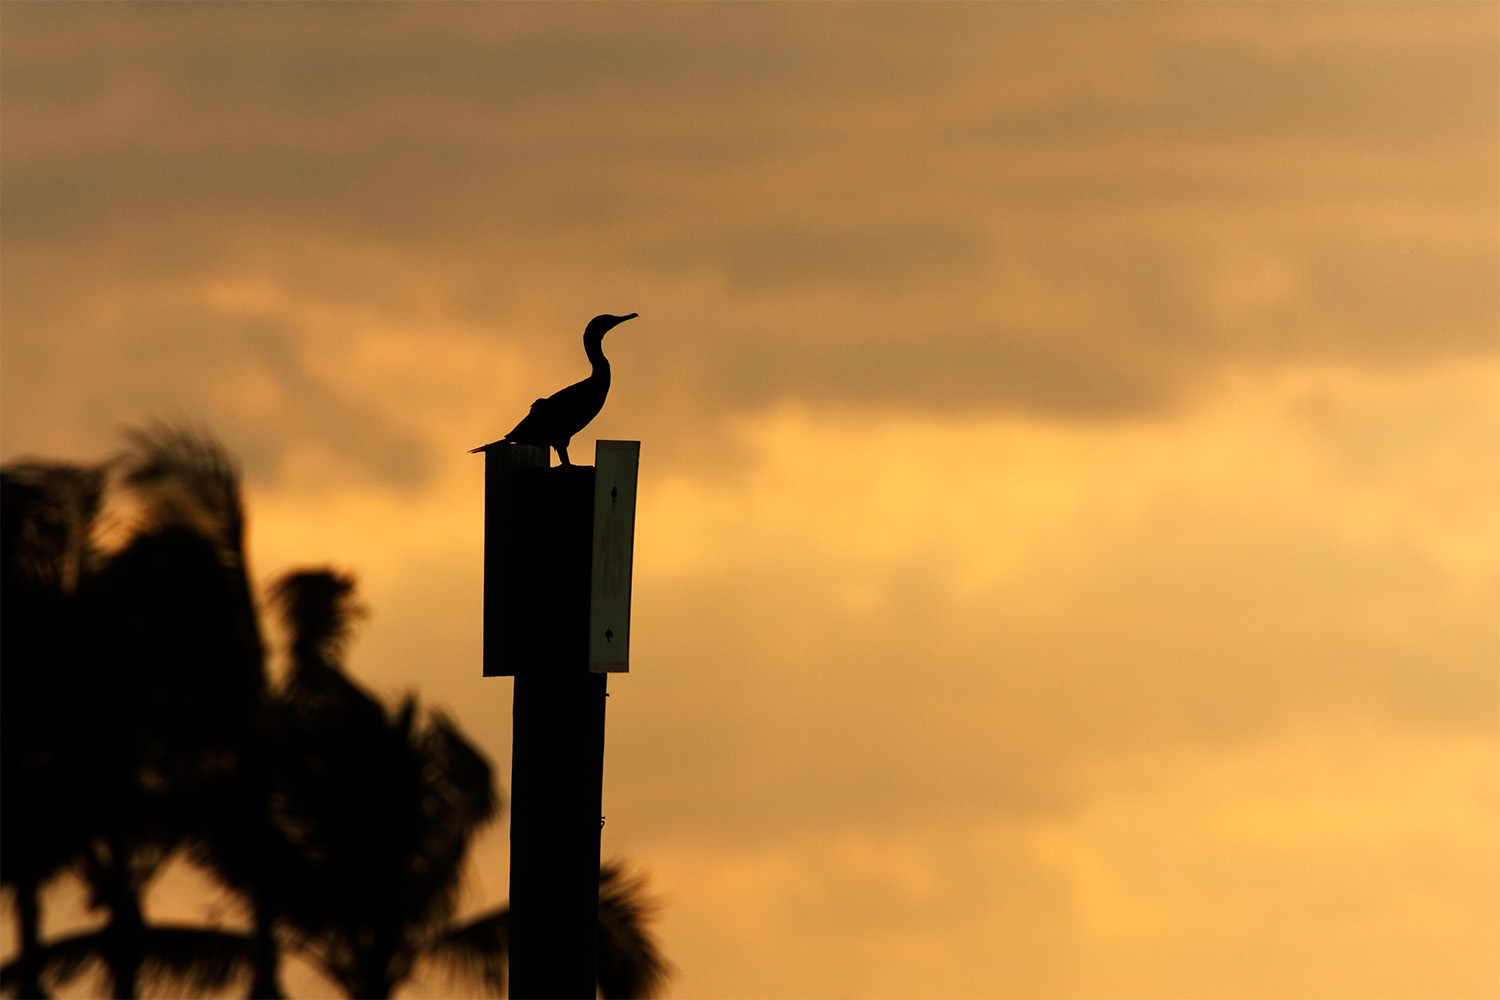 Double-crested cormorant (Phalacrocorax auritus) sitting on perch at sunset, Curry Hammock State Park, Florida, USA